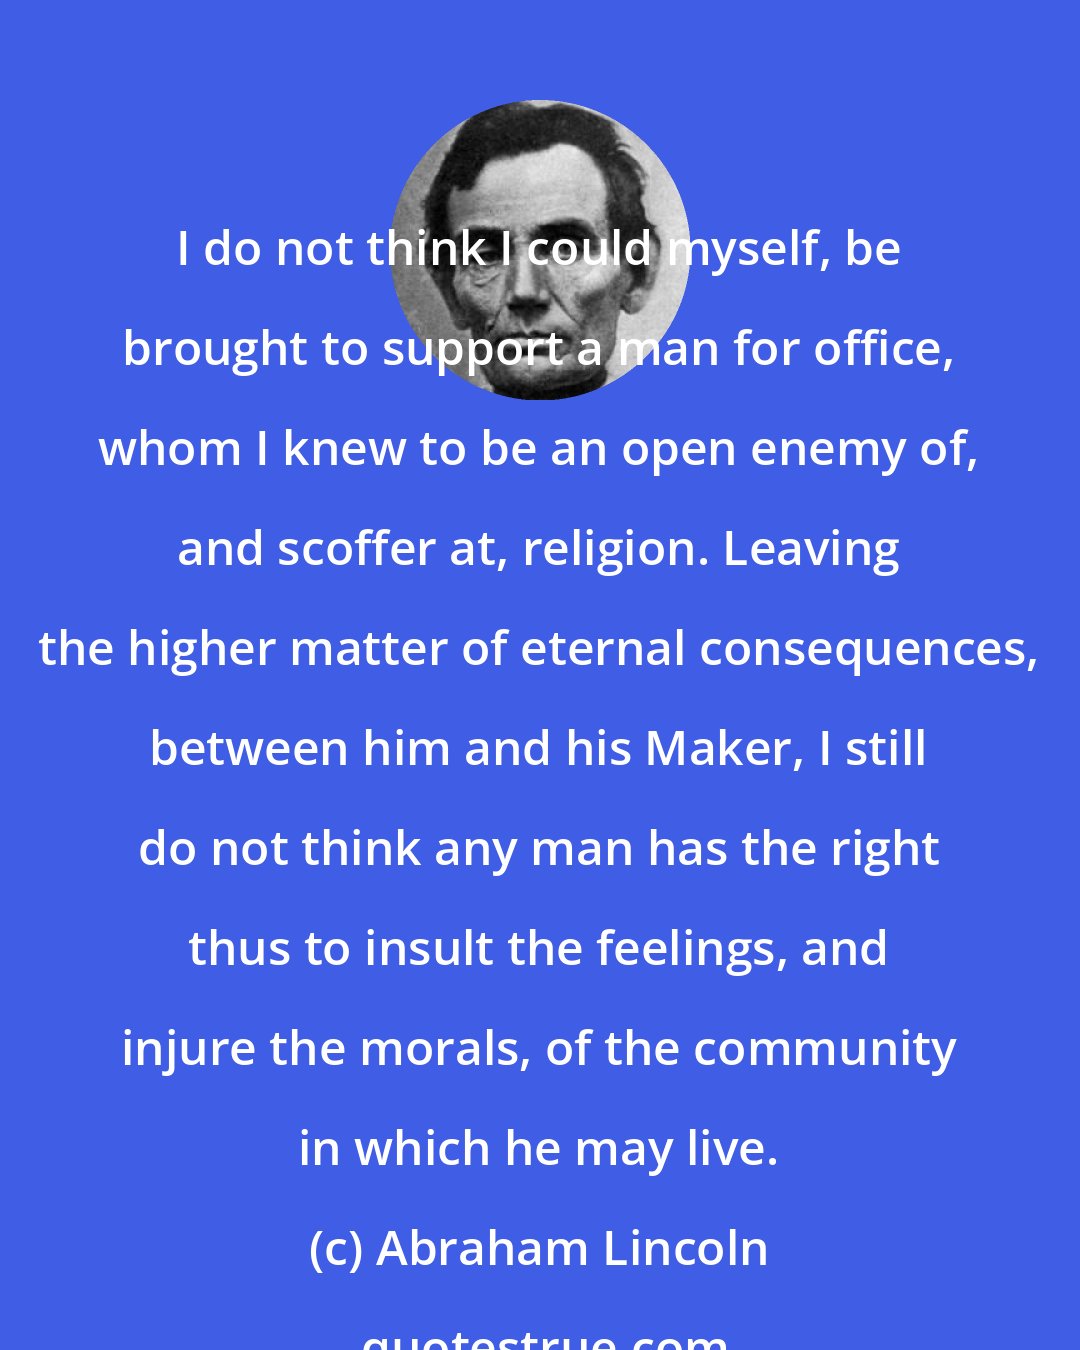 Abraham Lincoln: I do not think I could myself, be brought to support a man for office, whom I knew to be an open enemy of, and scoffer at, religion. Leaving the higher matter of eternal consequences, between him and his Maker, I still do not think any man has the right thus to insult the feelings, and injure the morals, of the community in which he may live.